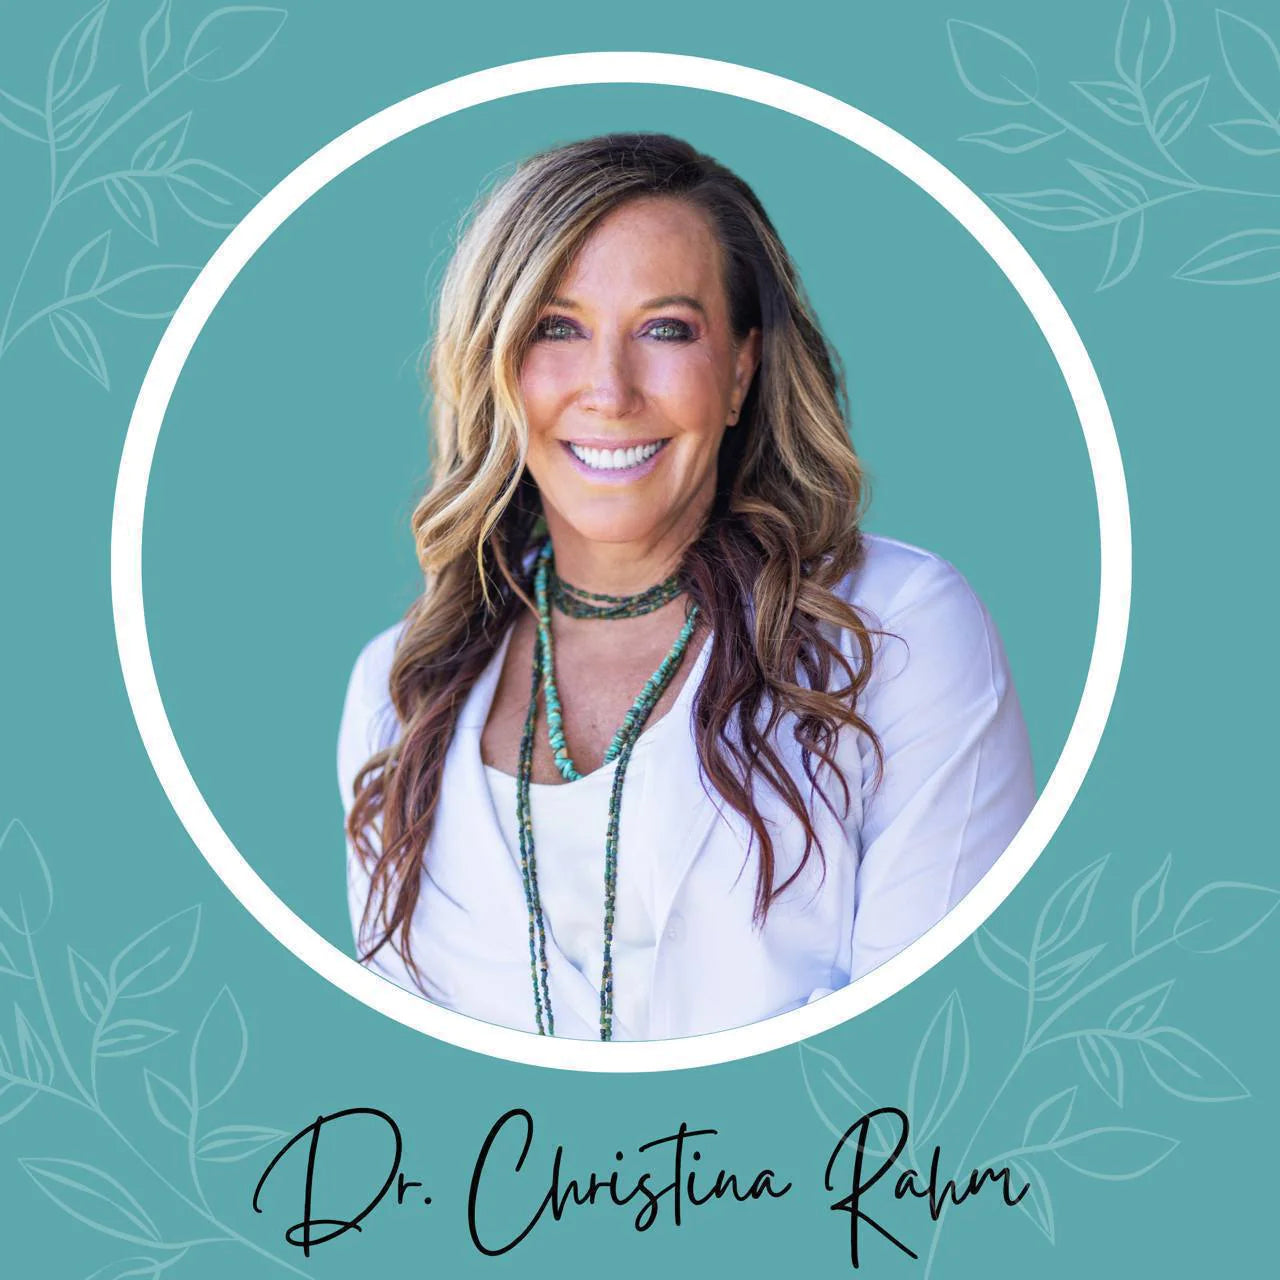 Weekly report by Dr. Christina Rahm - Thanksgiving